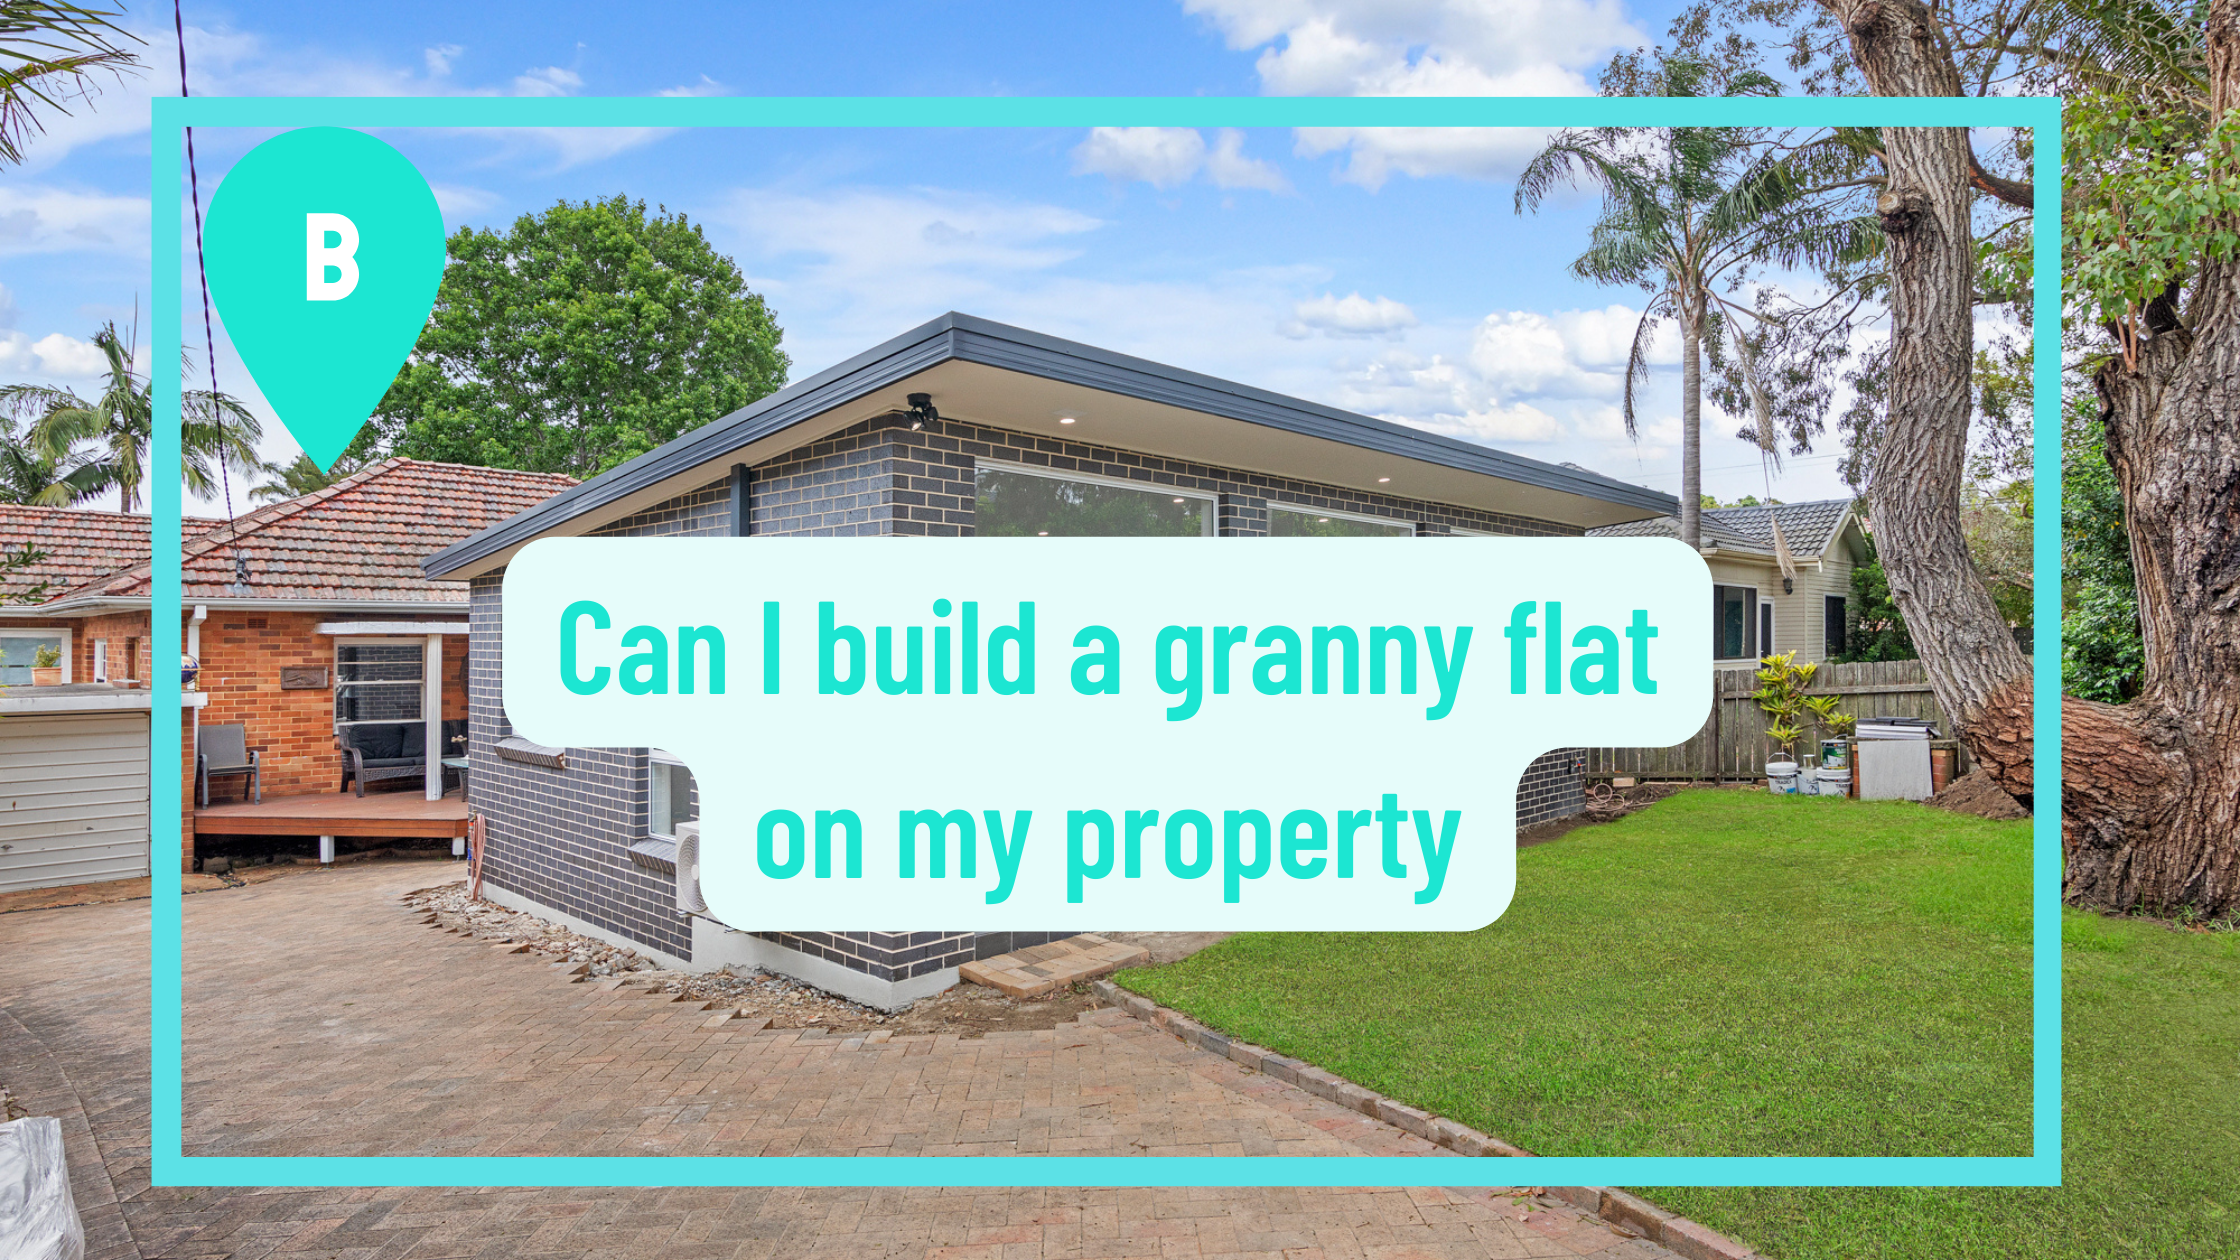 HOW MUCH IMPACT DOES A GRANNY FLAT HAVE ON PROPERTY VALUE?